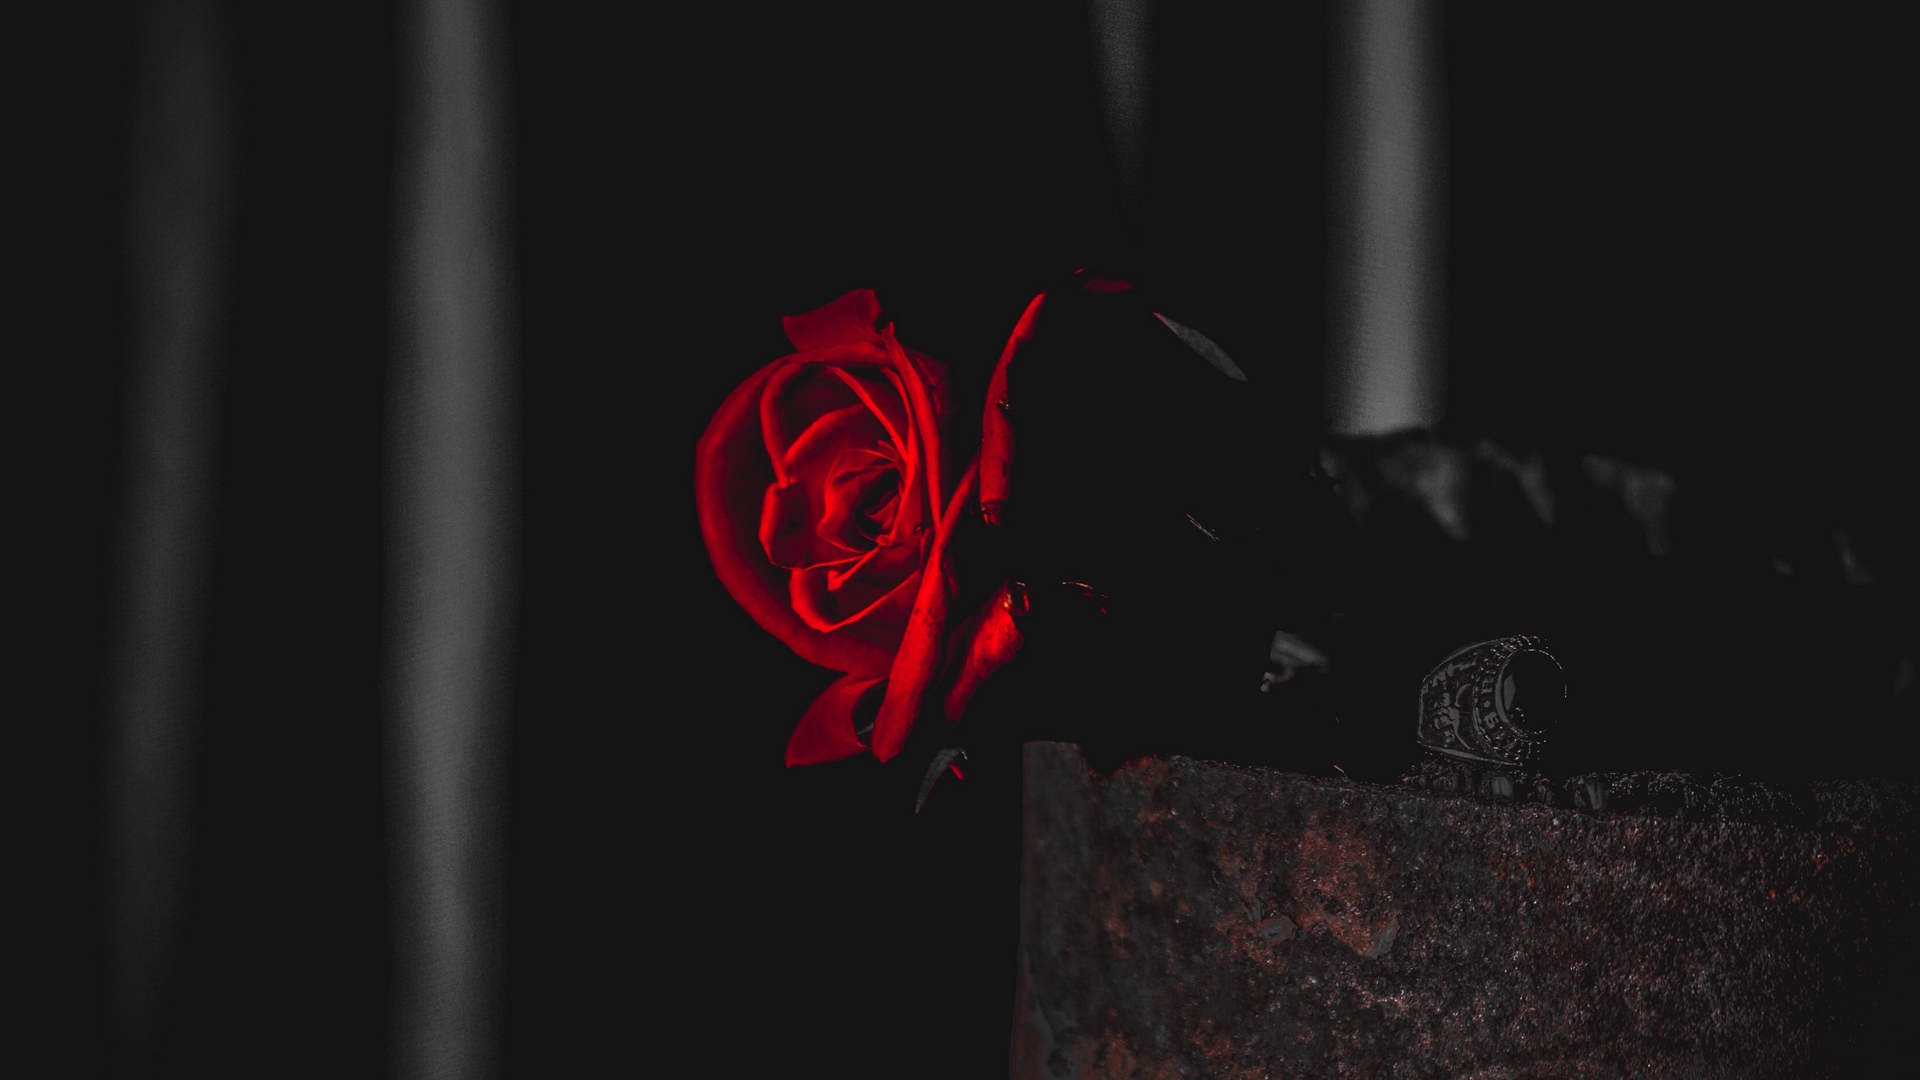 1080p Red Rose With Black Background Hd Wallpaper - doraemon